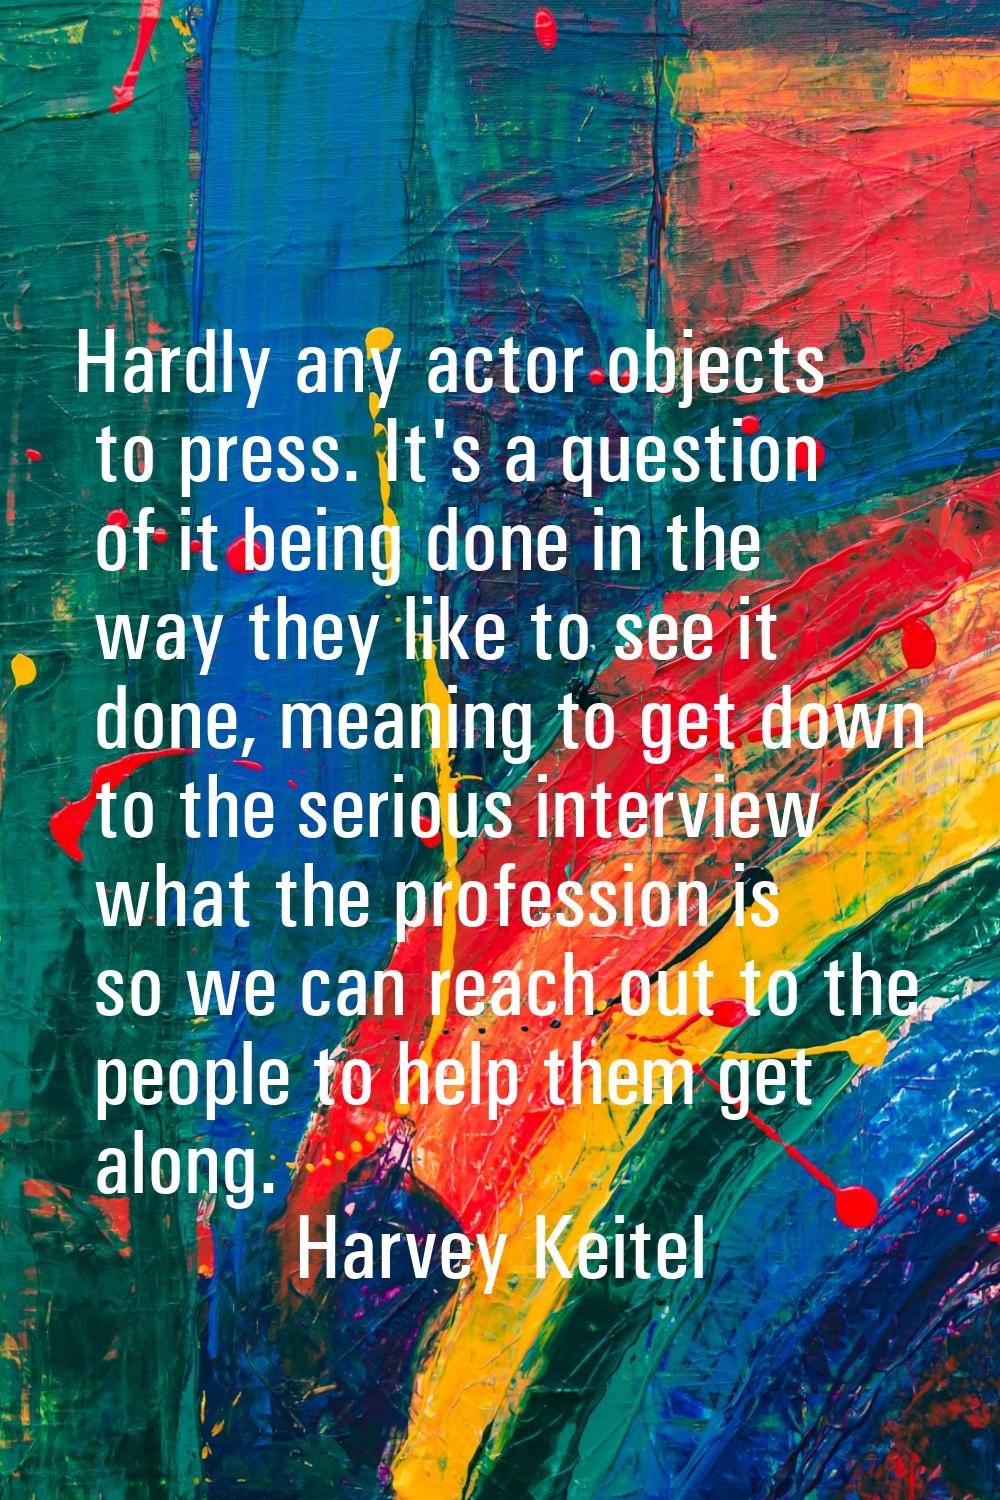 Hardly any actor objects to press. It's a question of it being done in the way they like to see it 